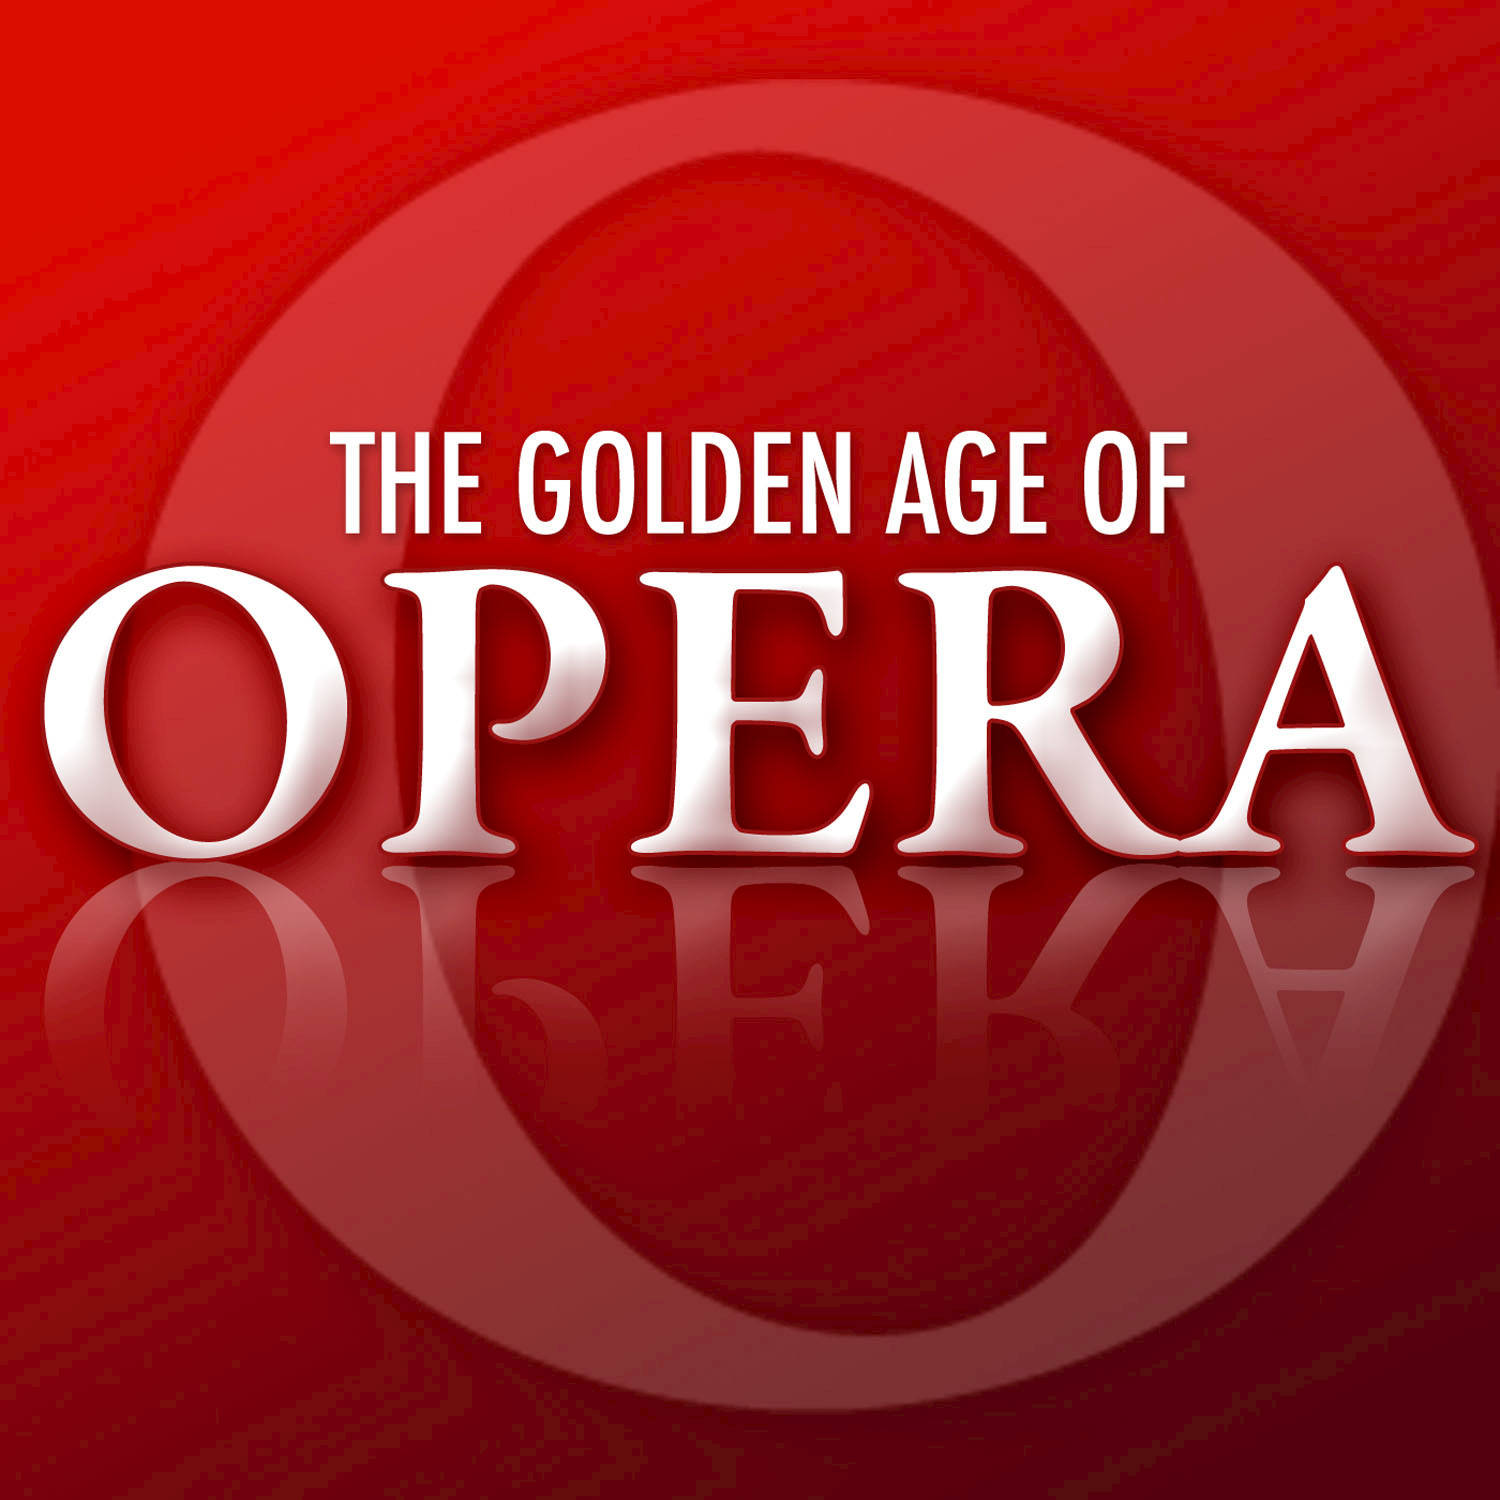 The Golden Age of Opera